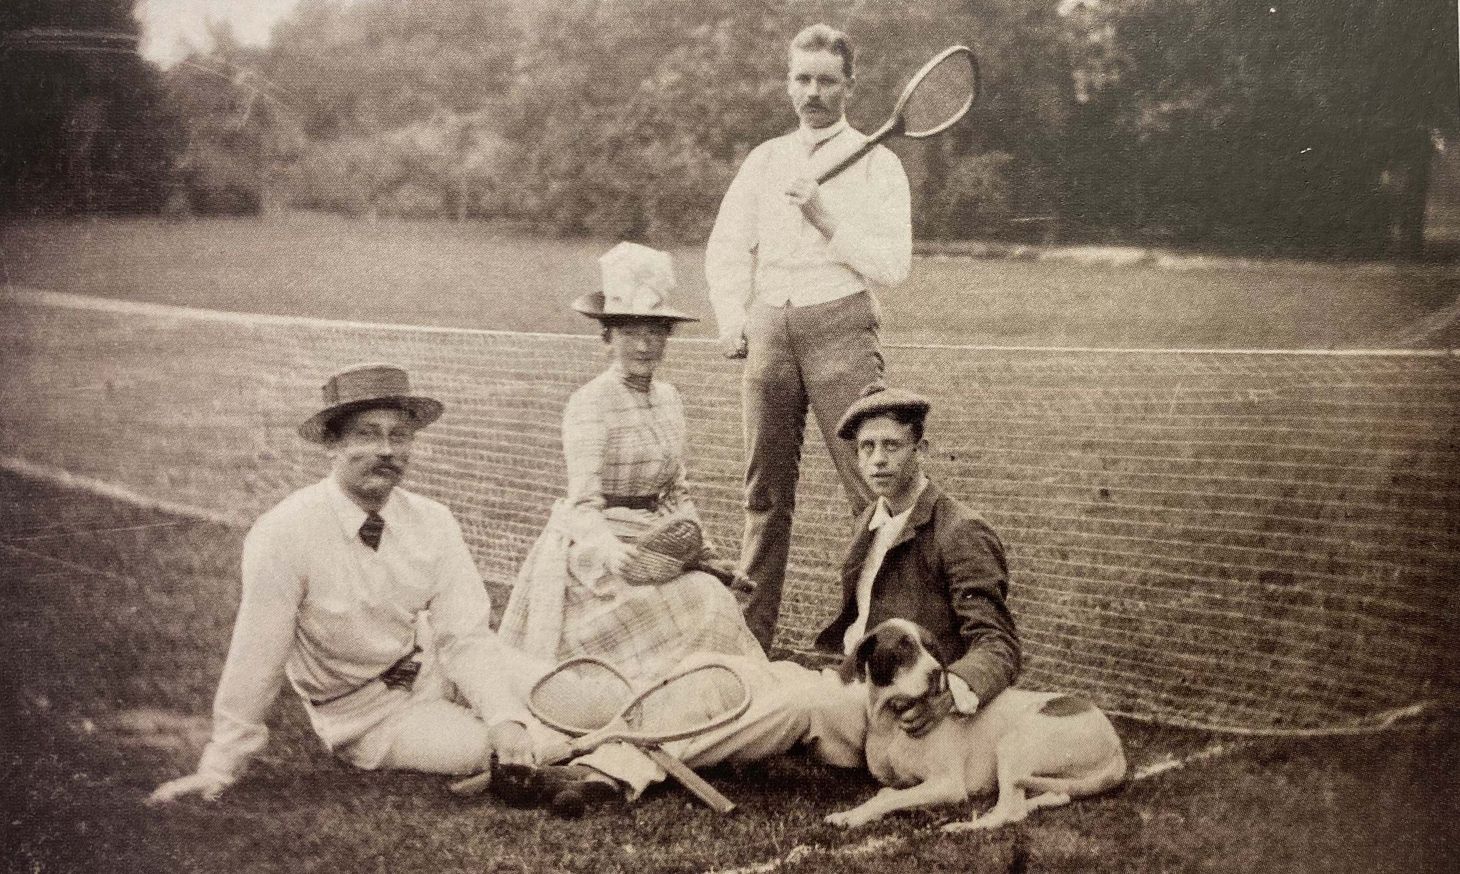 Photo of Anna at a tennis court with her husband, Richard Zanders, and friends in 1887.